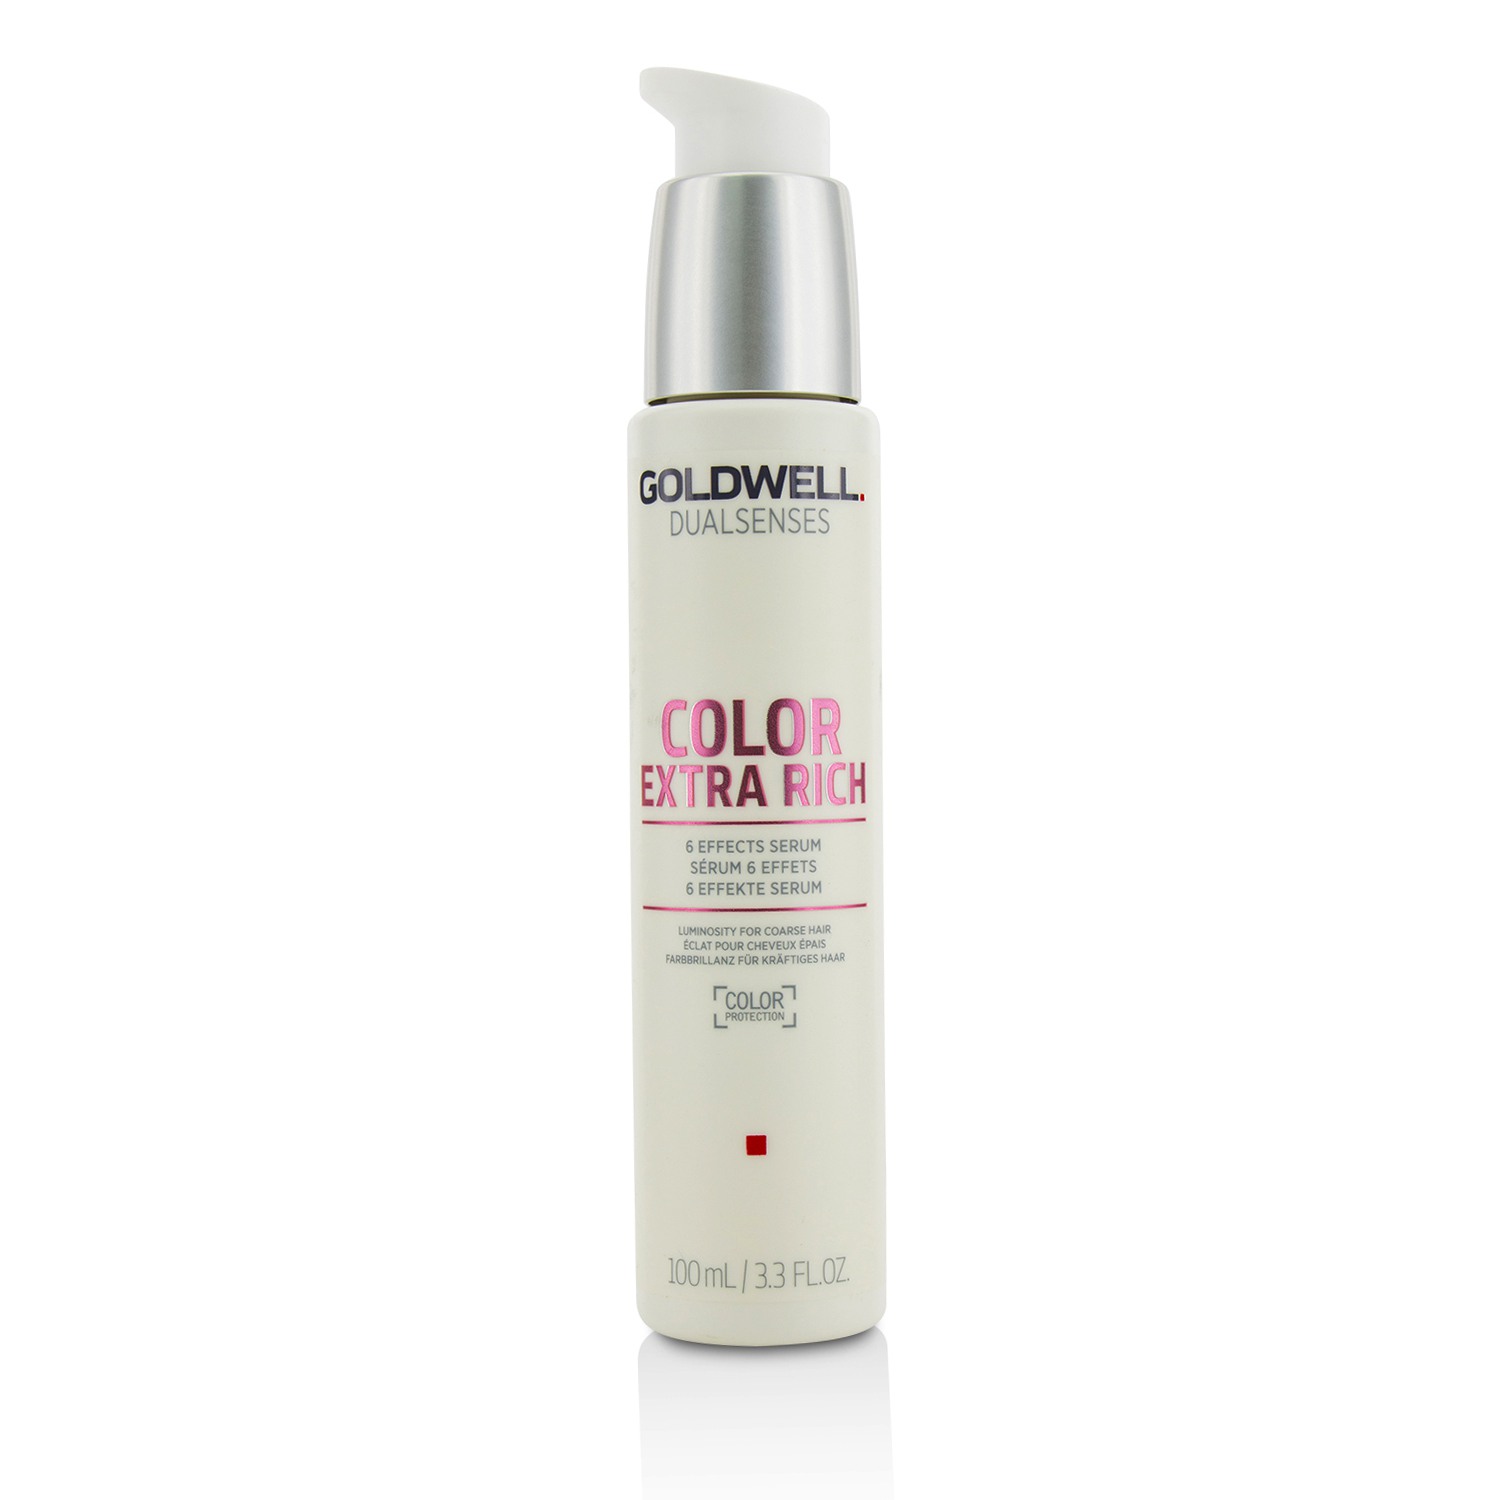 Dual Senses Color Extra Rich 6 Effects Serum (Luminosity For Coarse Hair) Goldwell Image